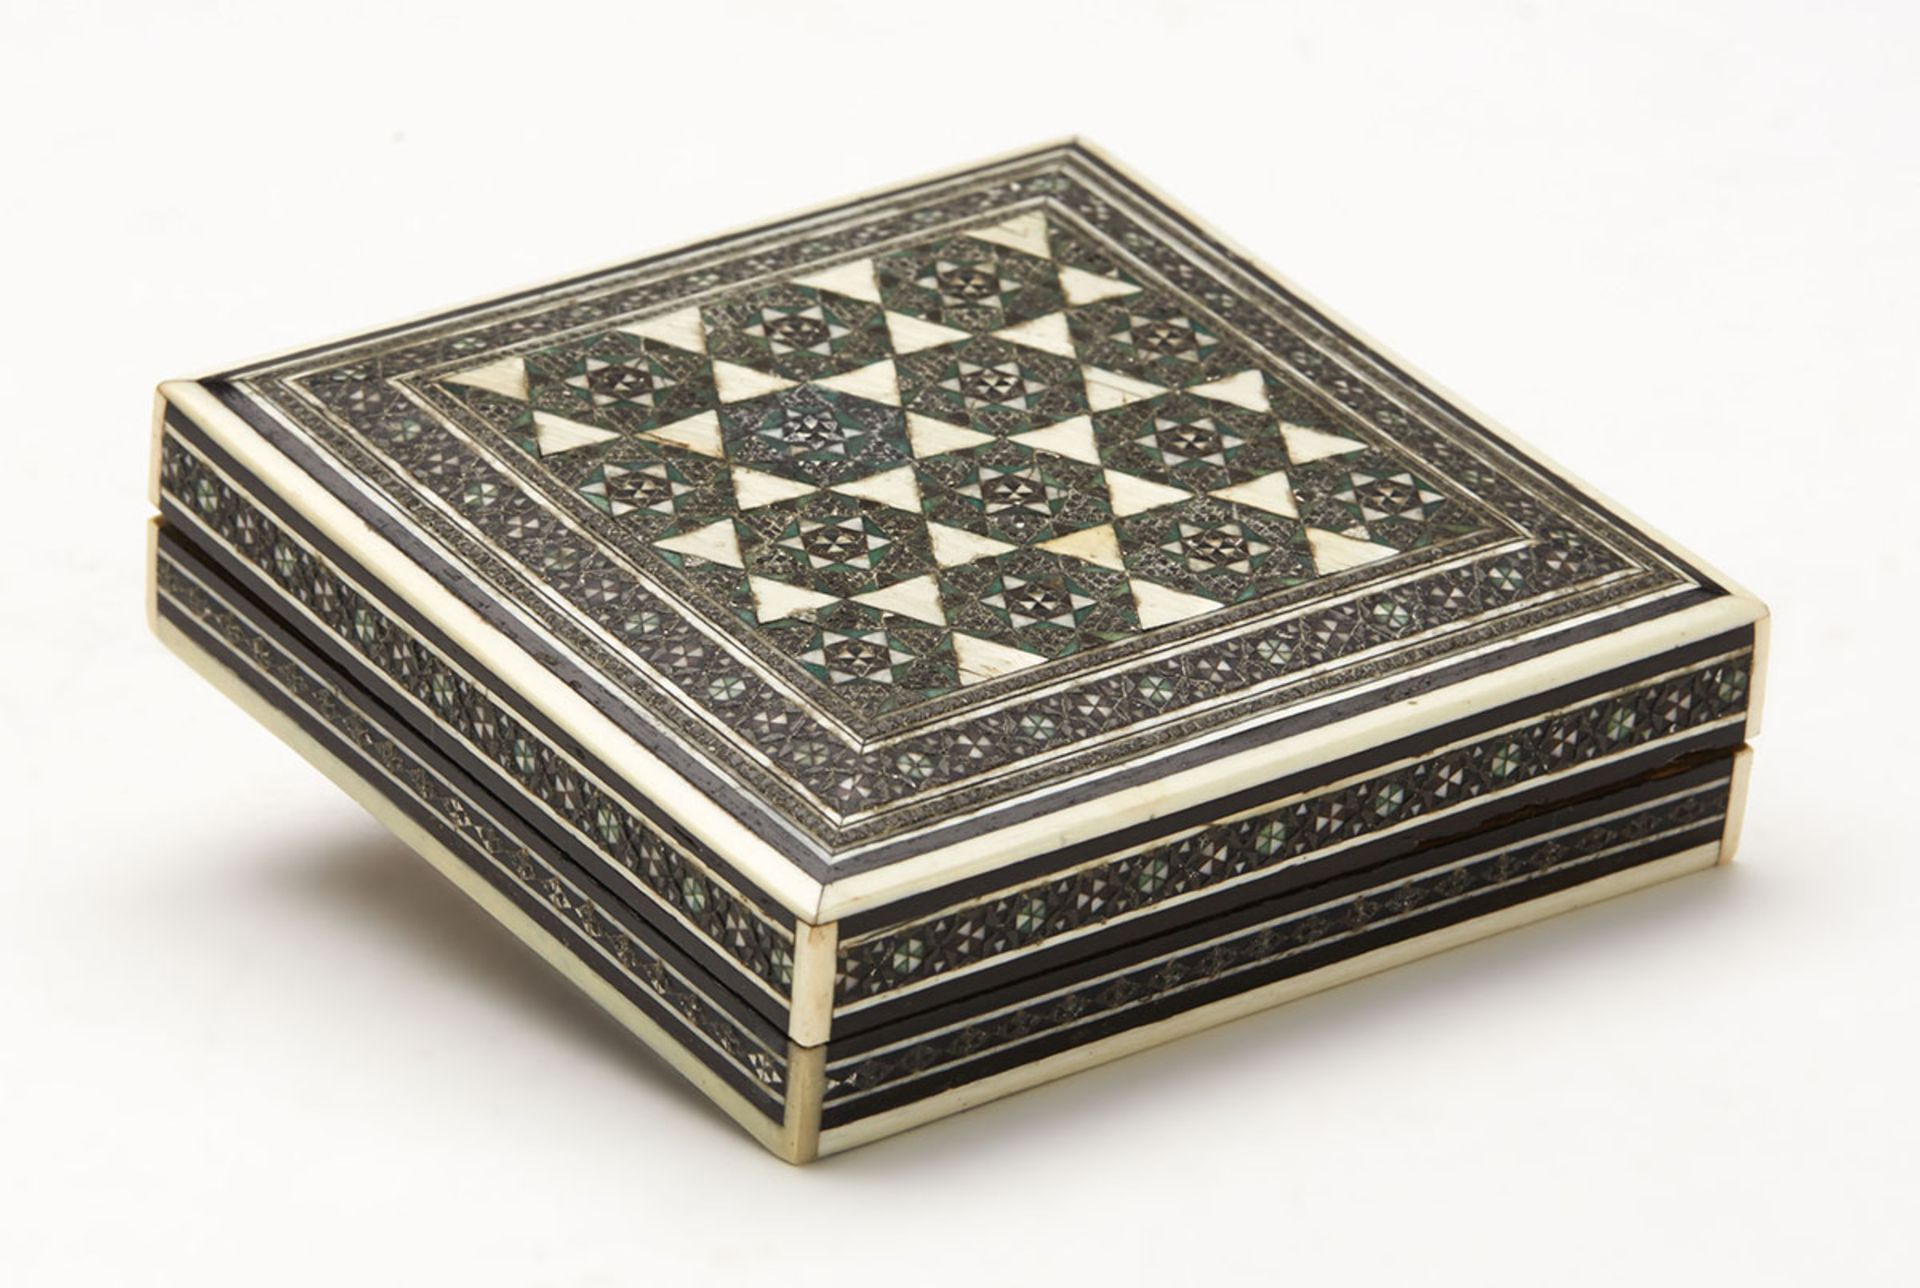 Antique Anglo Indian Inlaid Games Box With Counters 19Th C. - Image 5 of 6